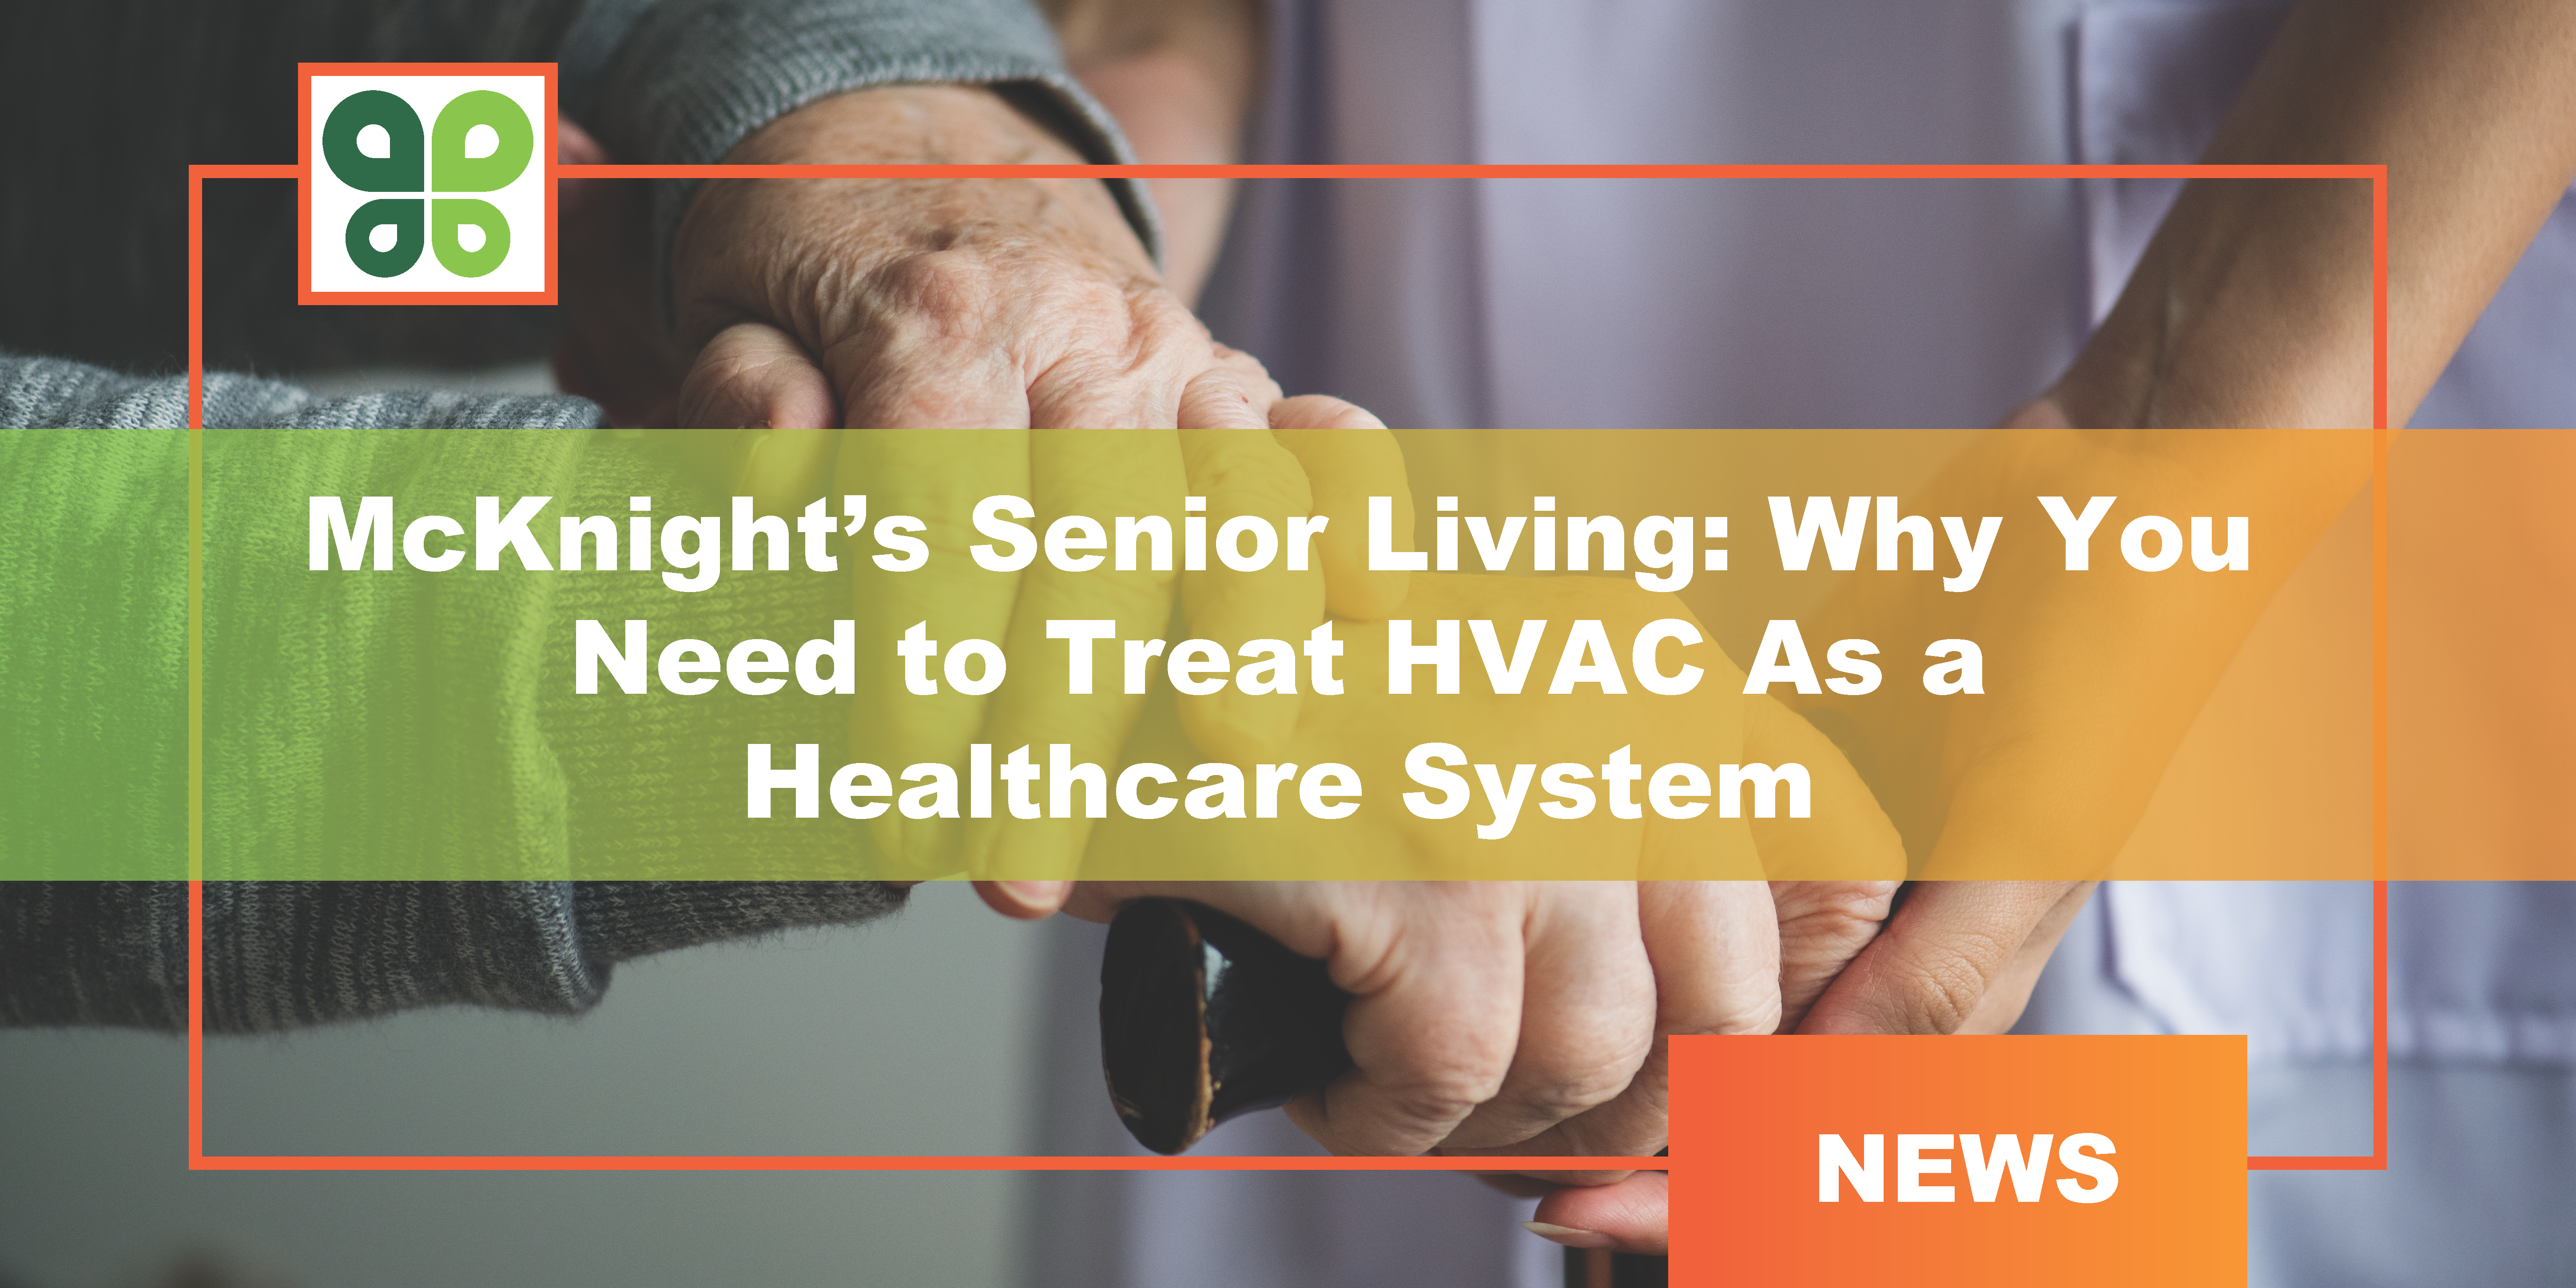 McKnights Senior Living: Why you need to treat HVAC as a healthcare system